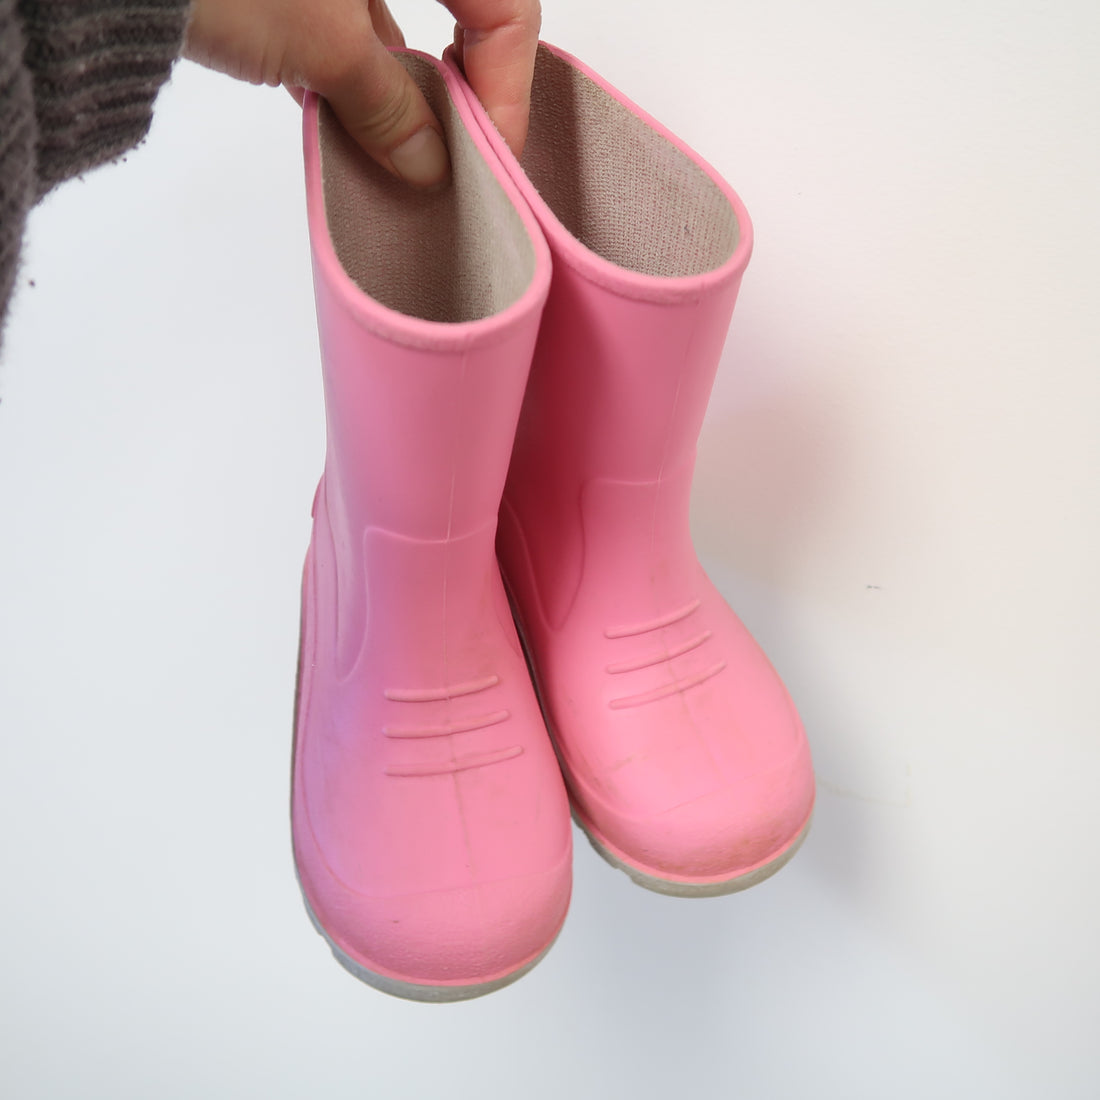 Unknown Brand - Rubber Boots (Shoes - 8)